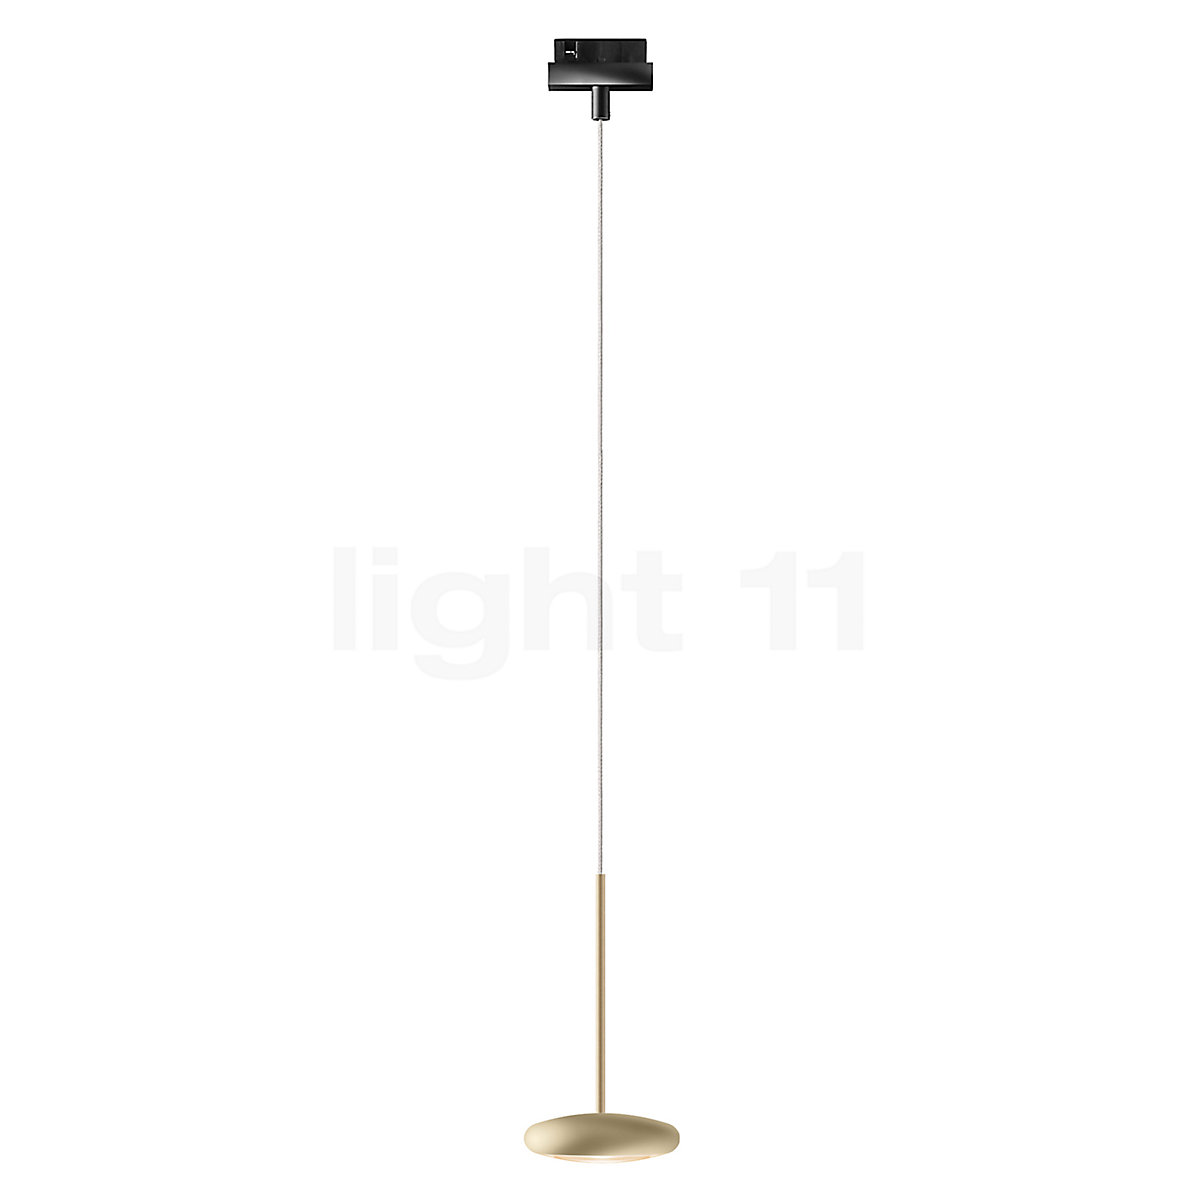 Buy Bruck Blop Track for Pendant LED Light Duolare at